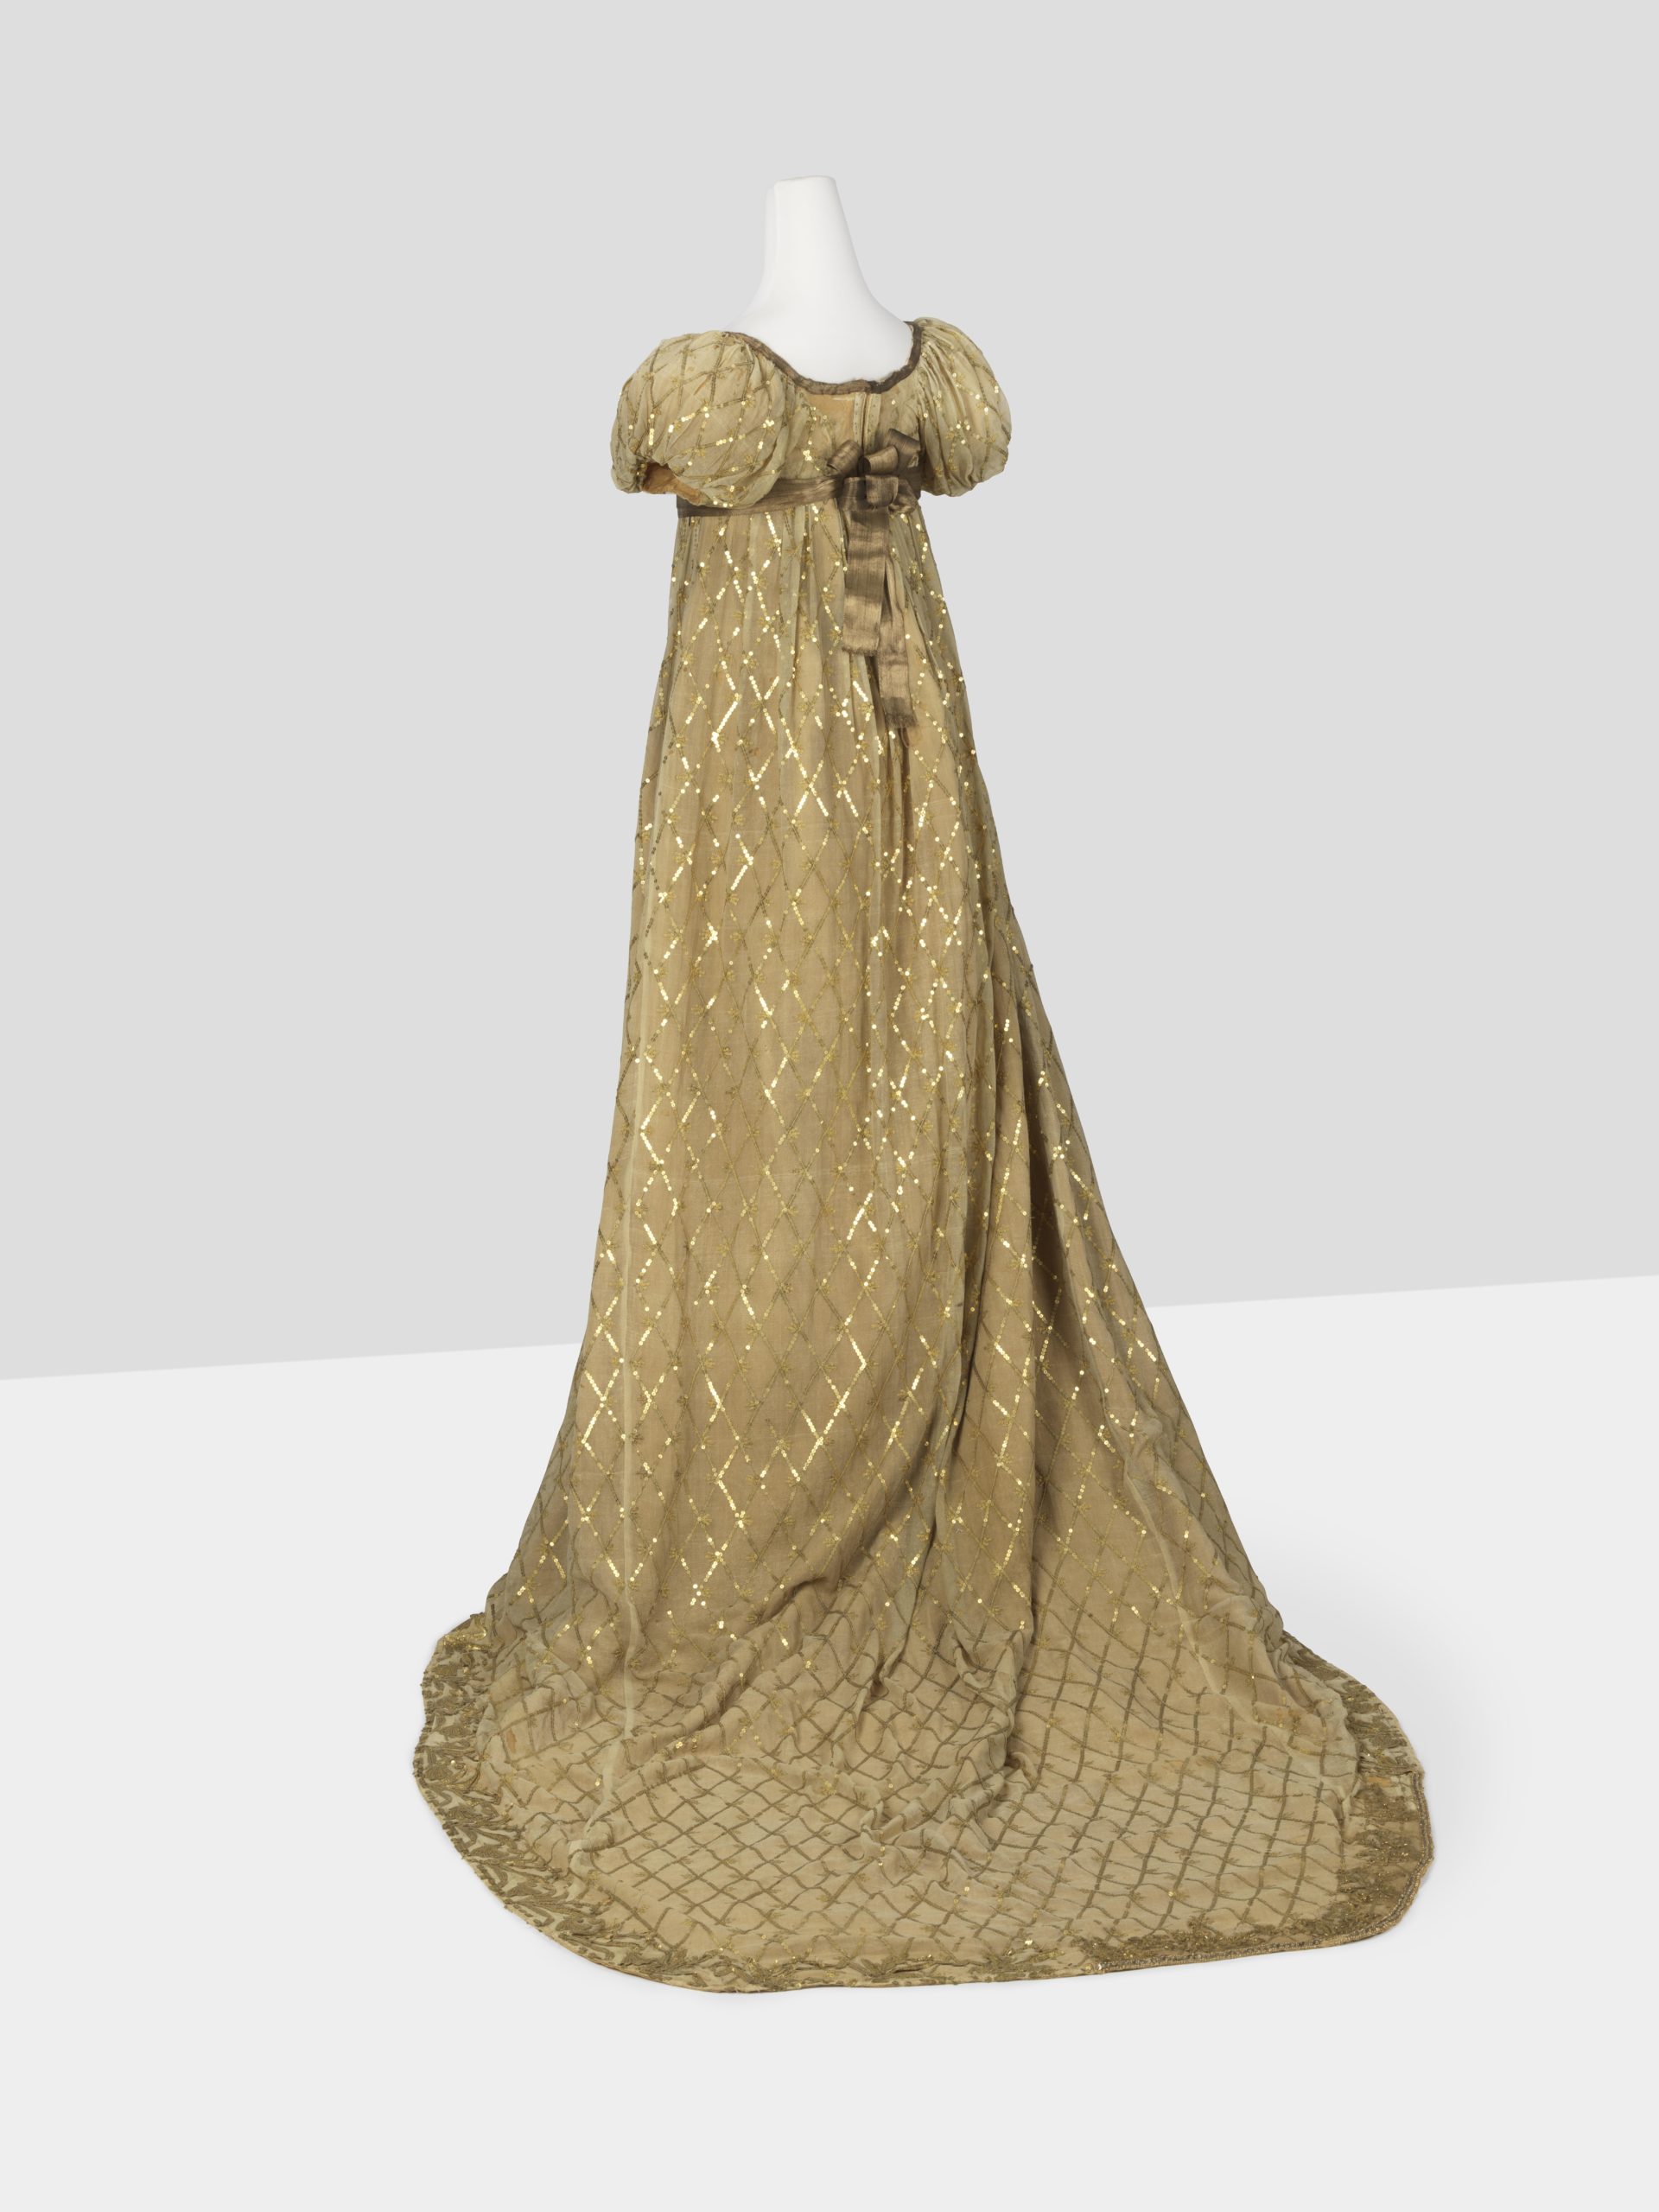 Evening dress, 1807 - 1810, crêpe georgette, sequins, metal, whalebone; cloth of gold with embroidery, Object Number 4477, donation 1924, centraalmuseum.nl